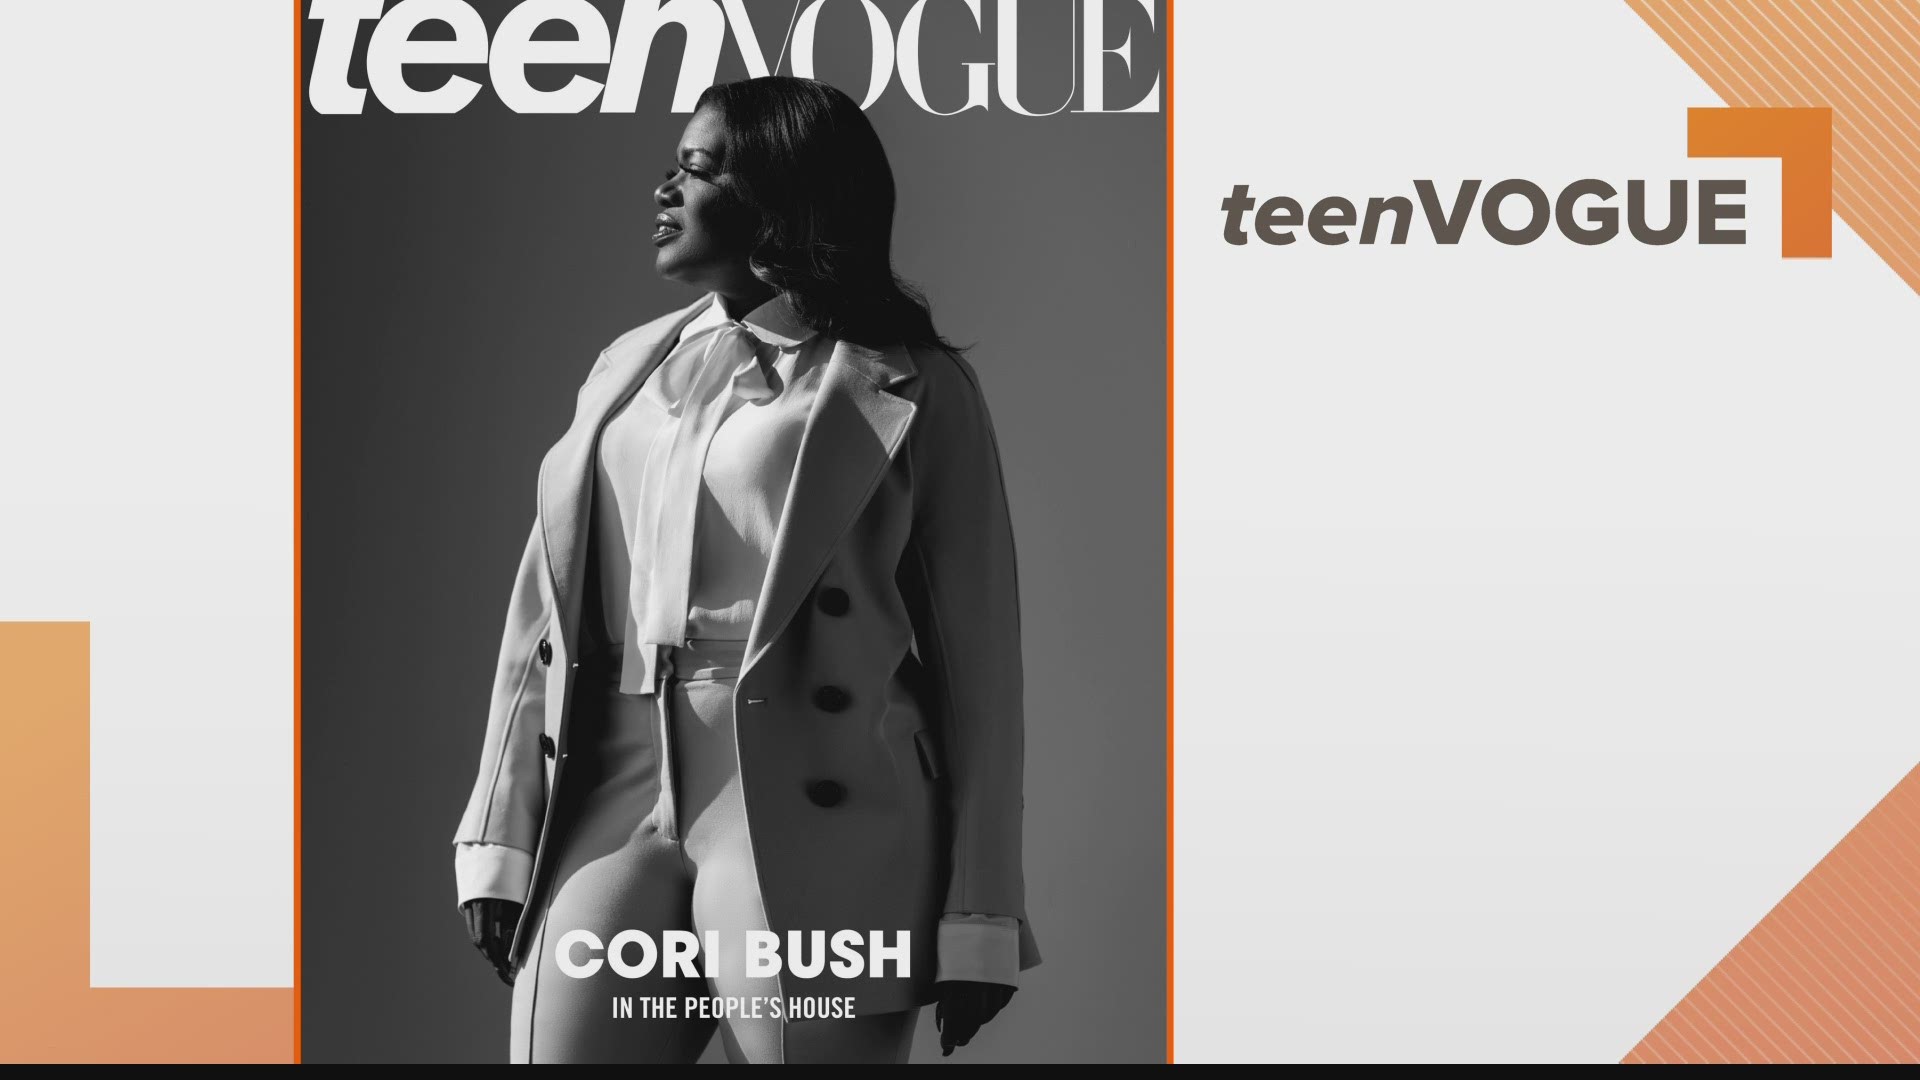 Earlier this month, she was sworn in as Missouri's first Black congresswoman. Now, she’s made her debut on the cover of Teen Vogue.